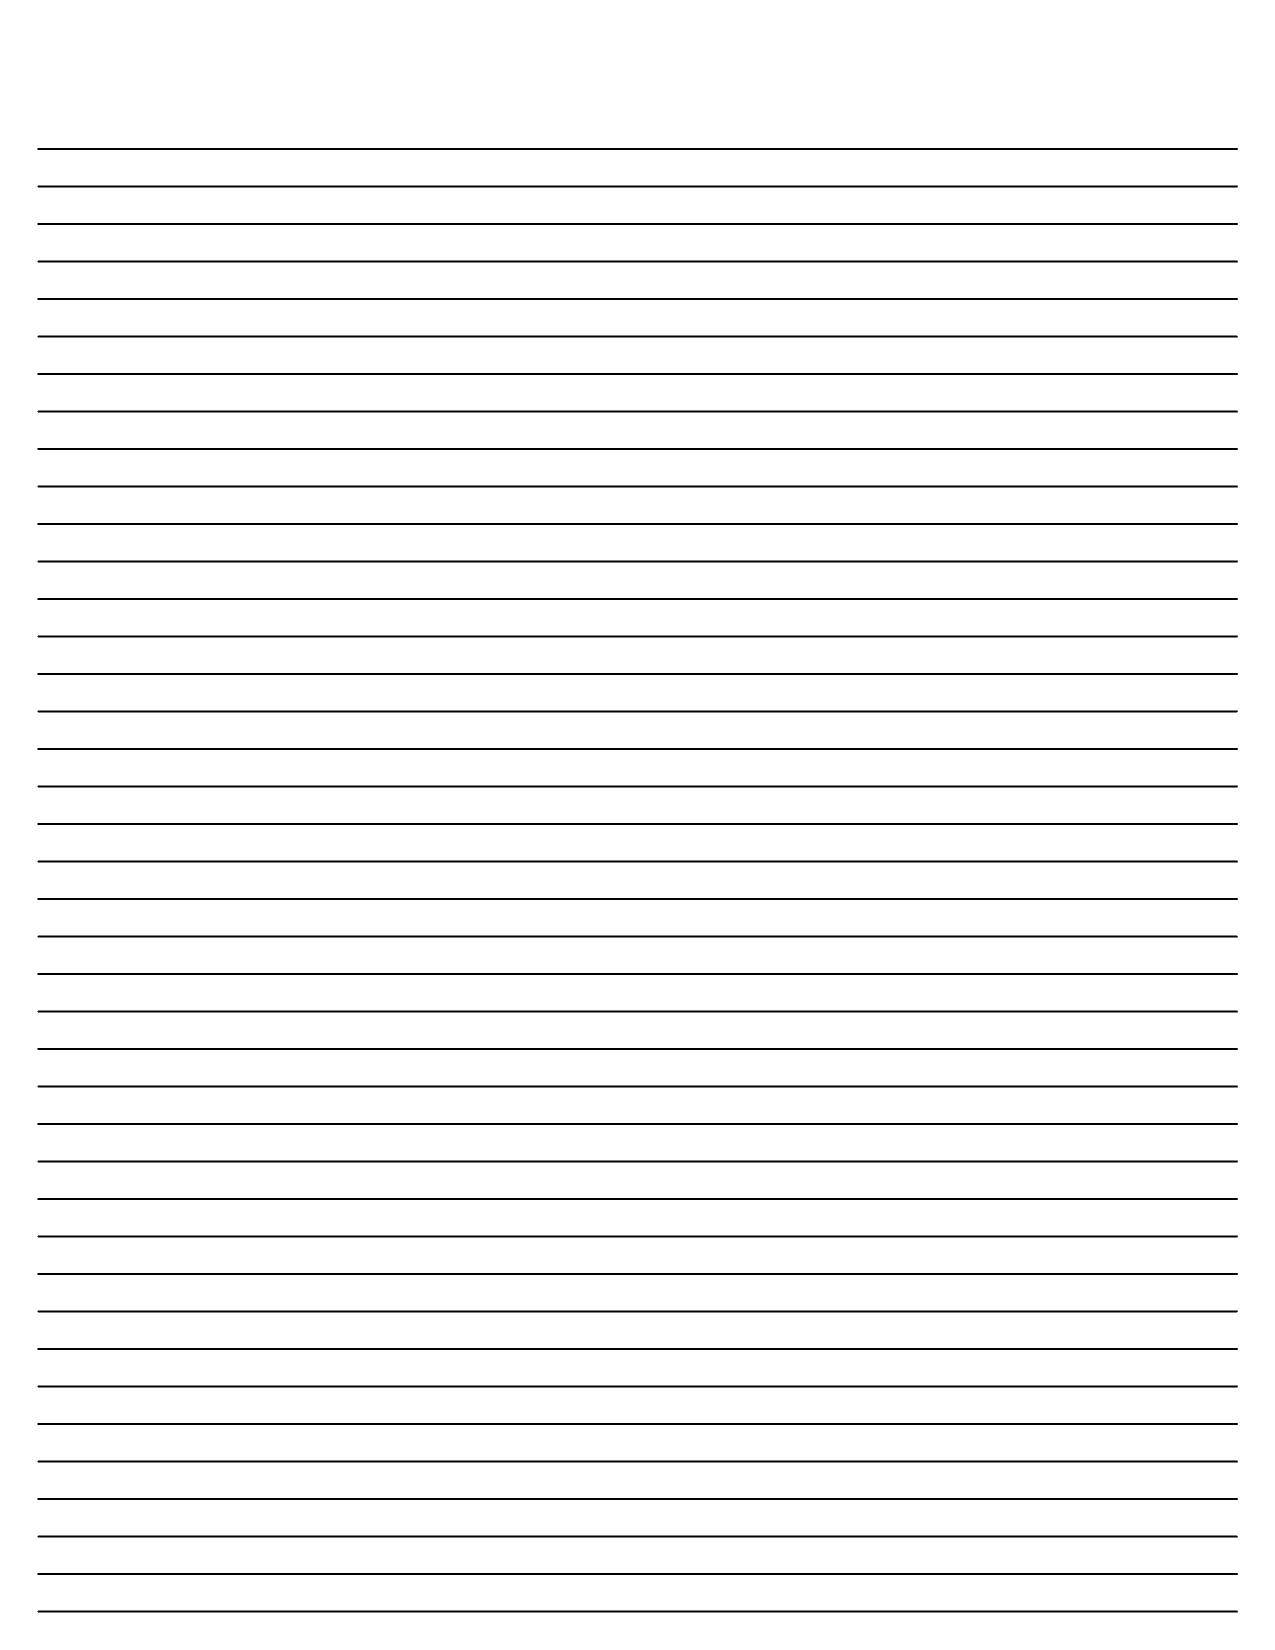 Coloring Sheet in the line. Category The notebook sheet in line. Tags:  worksheet, notebook, ruler.